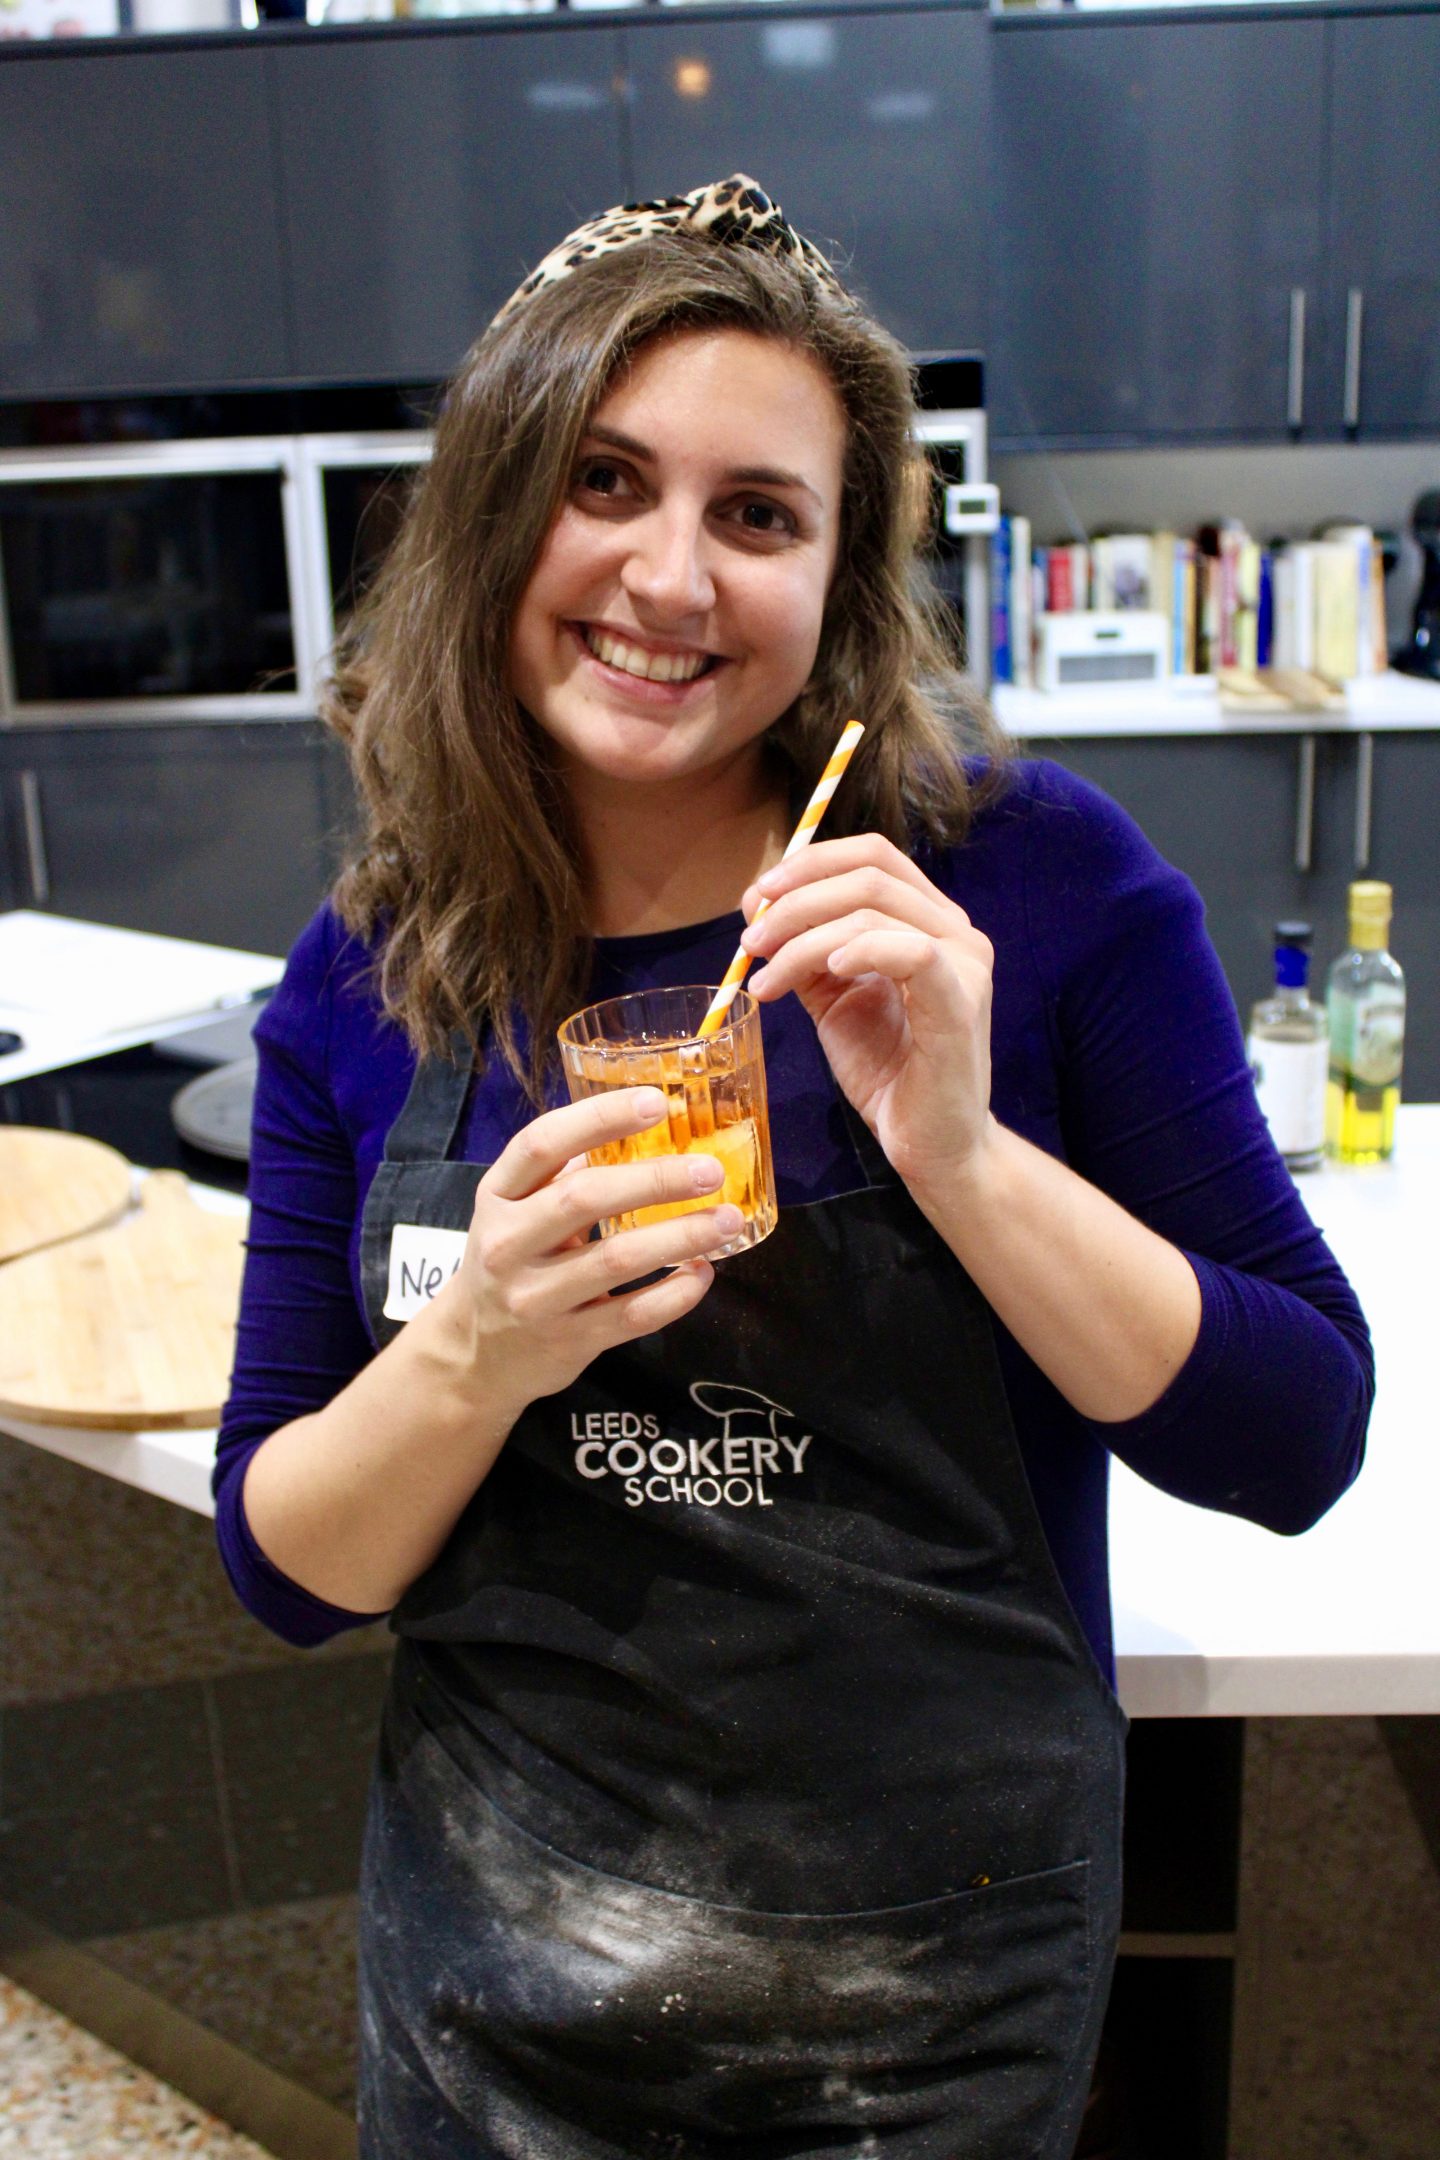 pizza making class leeds cookery school: Nell wearing blue dress and leopard print headband smiling at the camera whilst holding a glass of Aperol Spritz. In the background a kitchen scene is just out of focus.